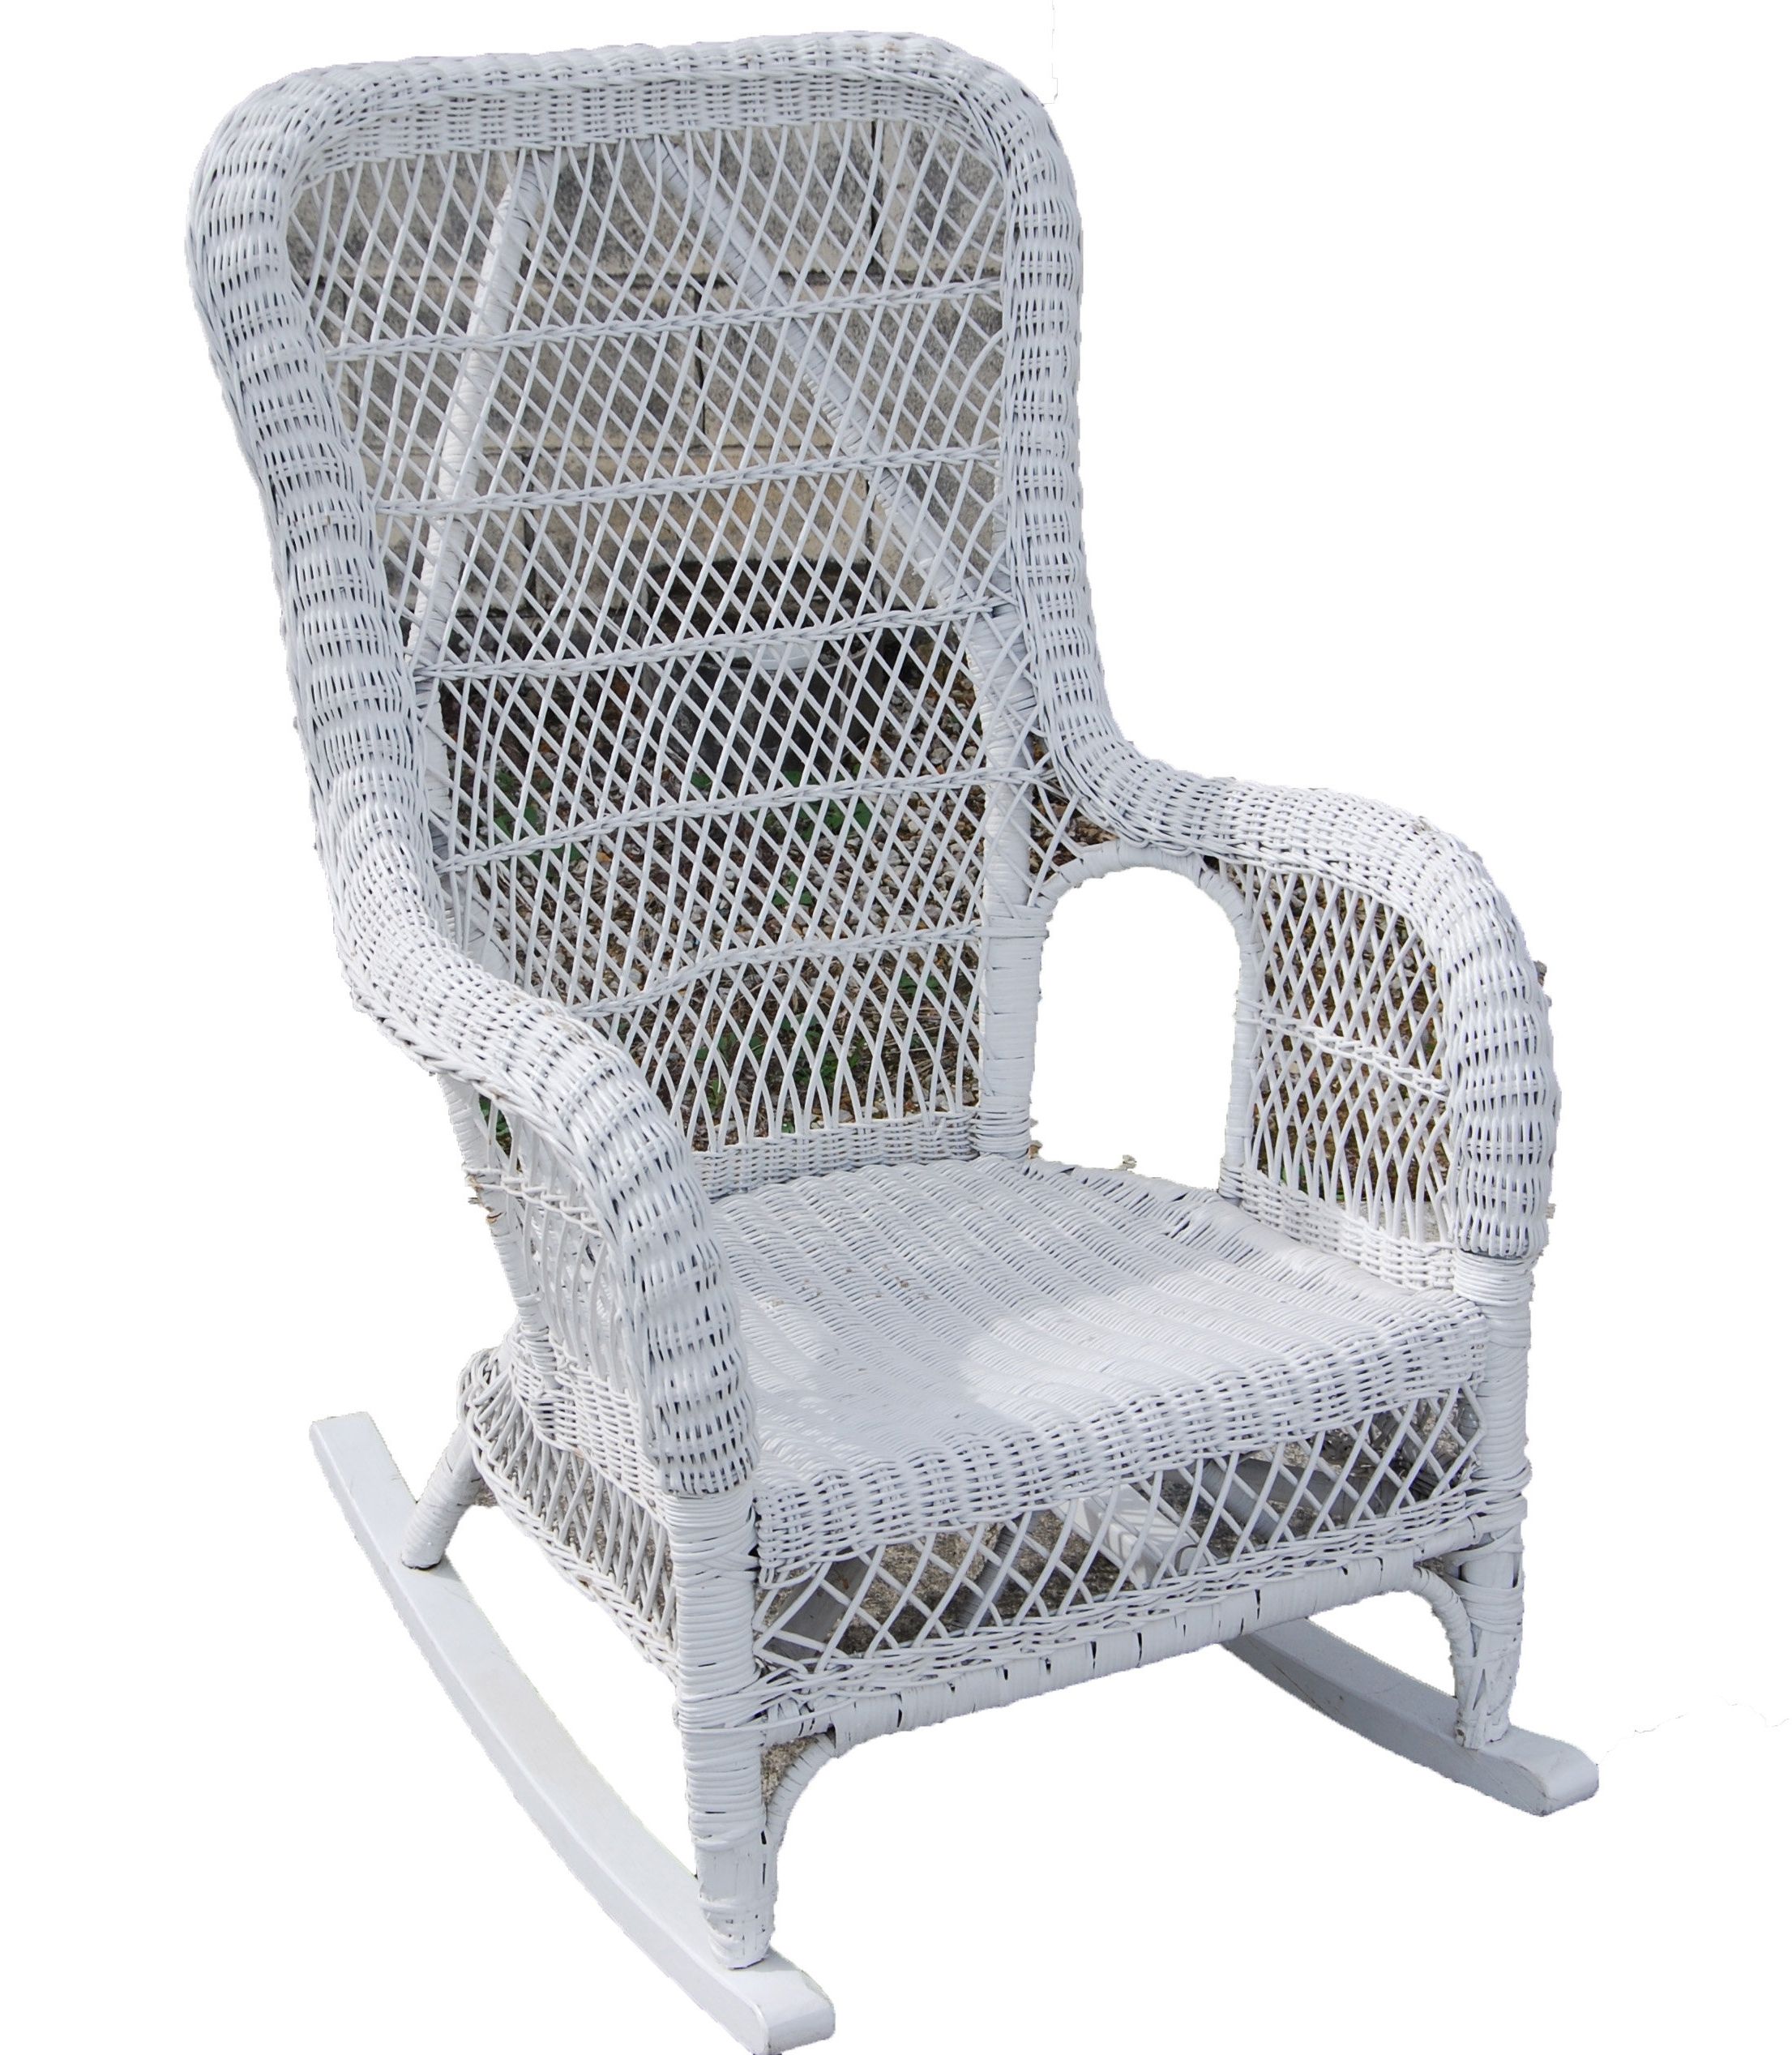 Popular Wicker Rocking Chair With Magazine Holder In Wicker Rocking Chairs For Porch Arm Chair Wicker & Loom Round Back (View 9 of 20)